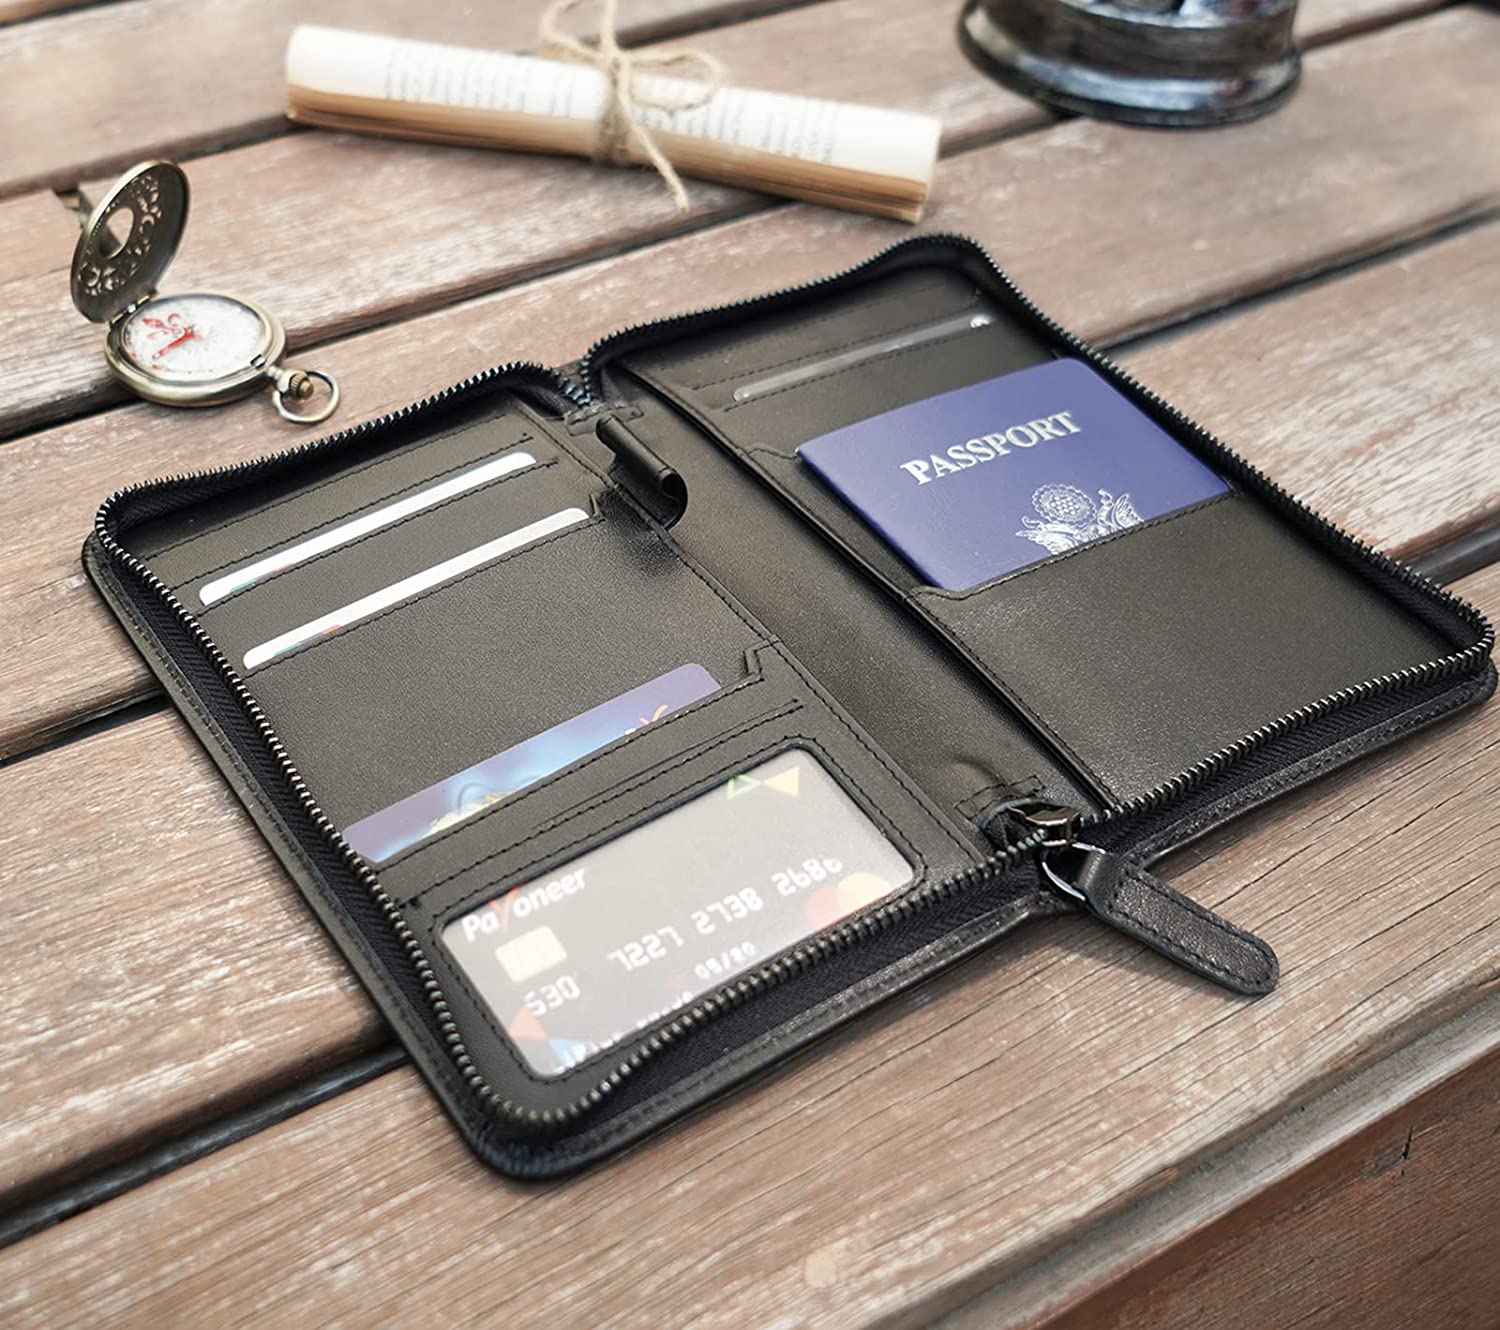 Travel with peace of mind knowing your personal information is secure with our RFID blocking passport holder, crafted with genuine leather and designed with precision to fit your documents perfectly.